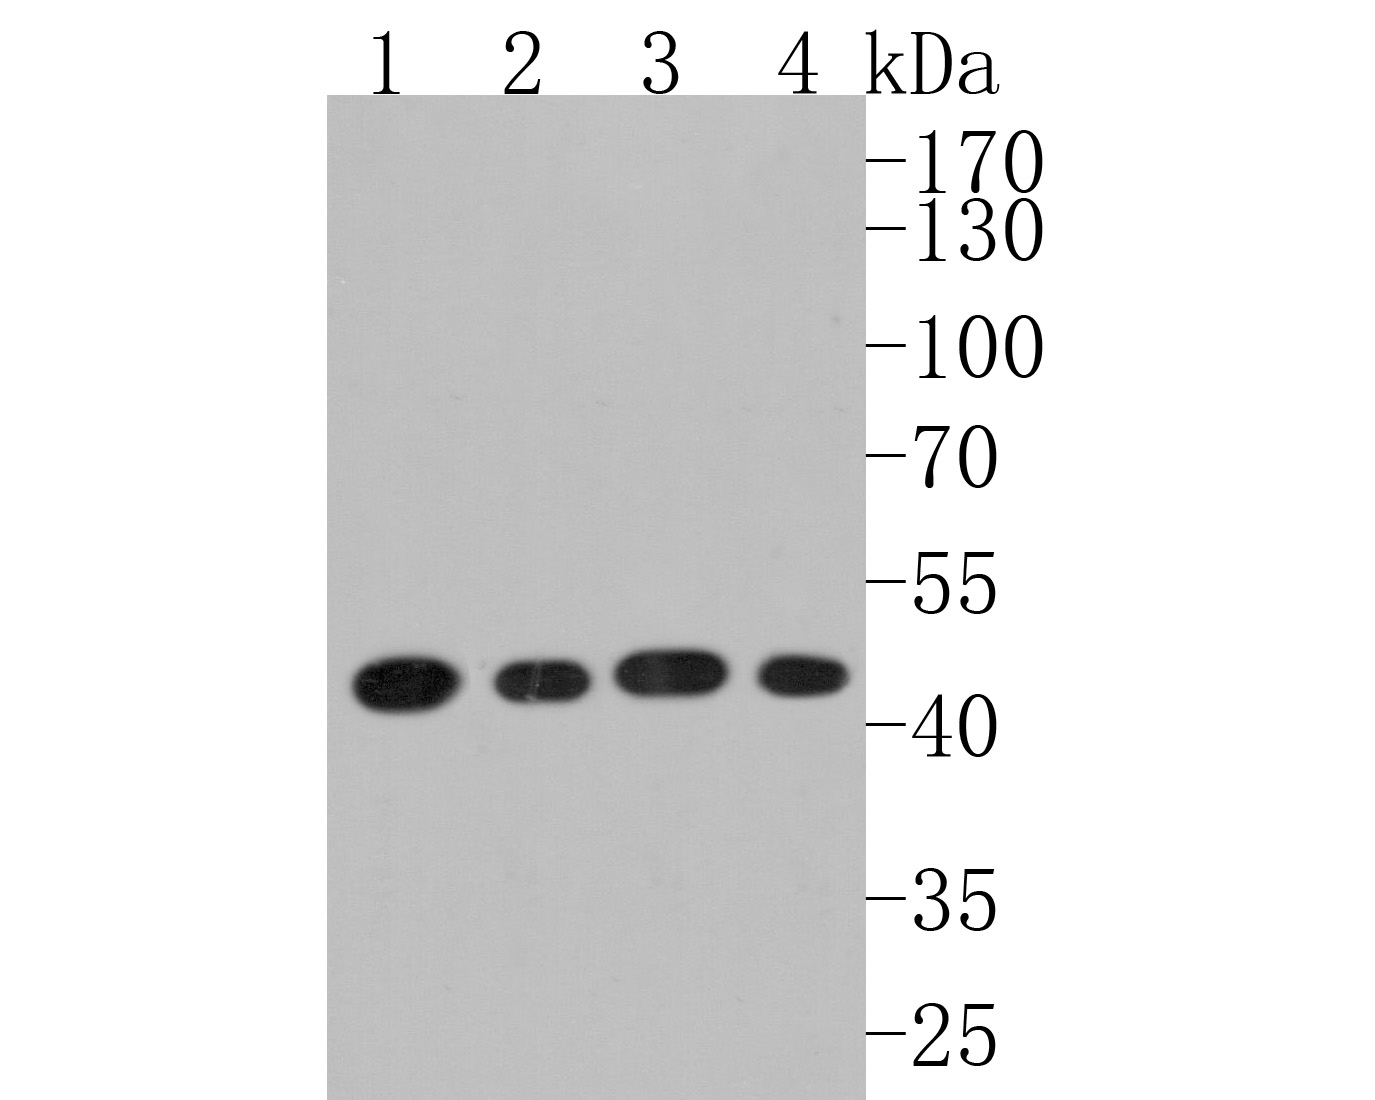 Western blot analysis of SCD1 on different lysates. Proteins were transferred to a PVDF membrane and blocked with 5% BSA in PBS for 1 hour at room temperature. The primary antibody (HA500119, 1/1,000) was used in 5% BSA at room temperature for 2 hours. Goat Anti-Rabbit IgG - HRP Secondary Antibody (HA1001) at 1:200,000 dilution was used for 1 hour at room temperature.<br />
Positive control: <br />
Lane 1: HepG2 cell lysate<br />
Lane 2: 293 cell lysate<br />
Lane 3: Hela cell lysate<br />
Lane 4: A549 cell lysate